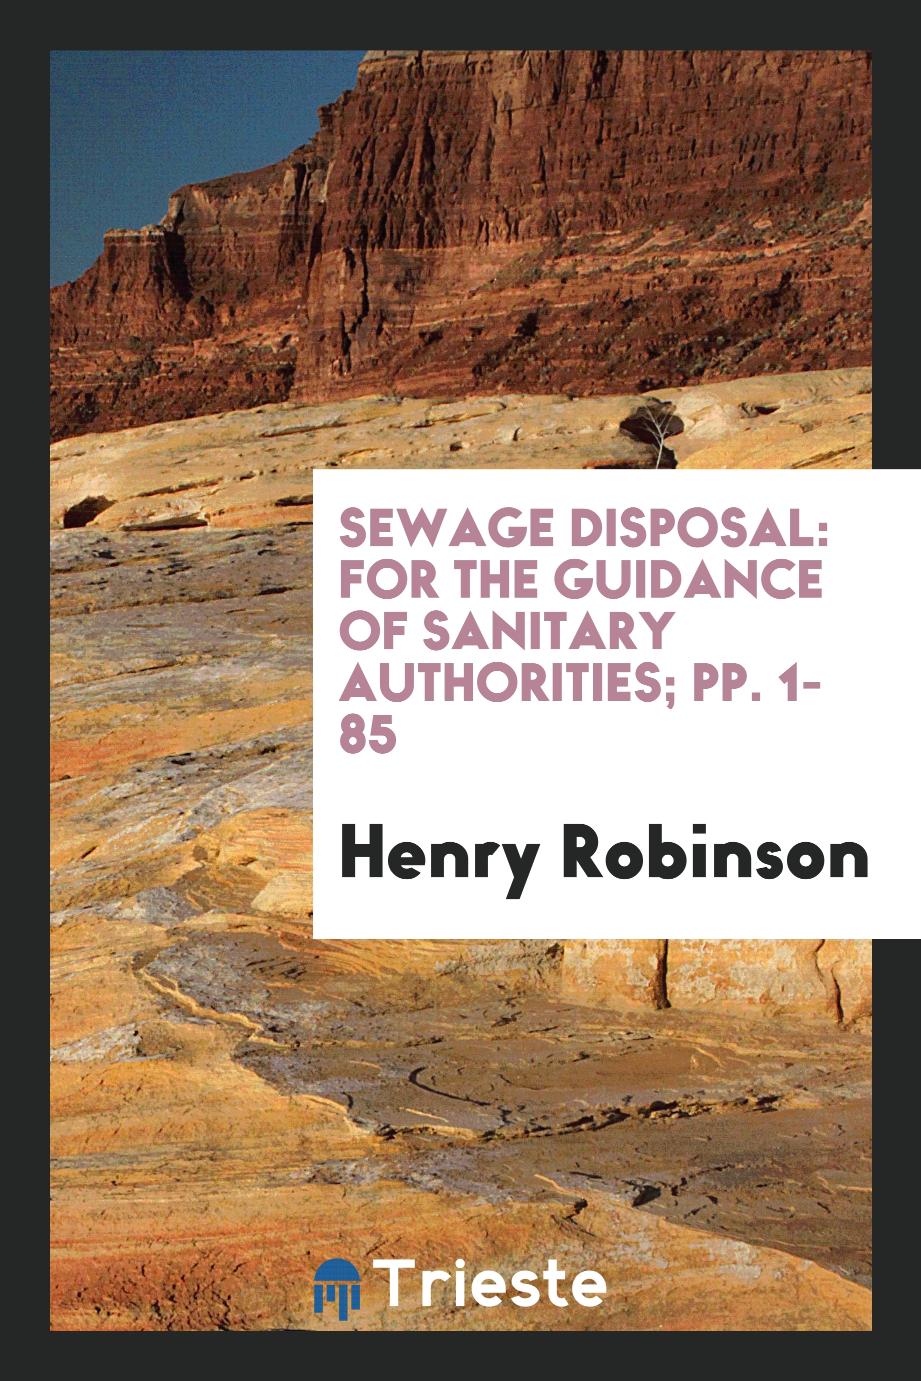 Sewage Disposal: For the Guidance of Sanitary Authorities; pp. 1-85